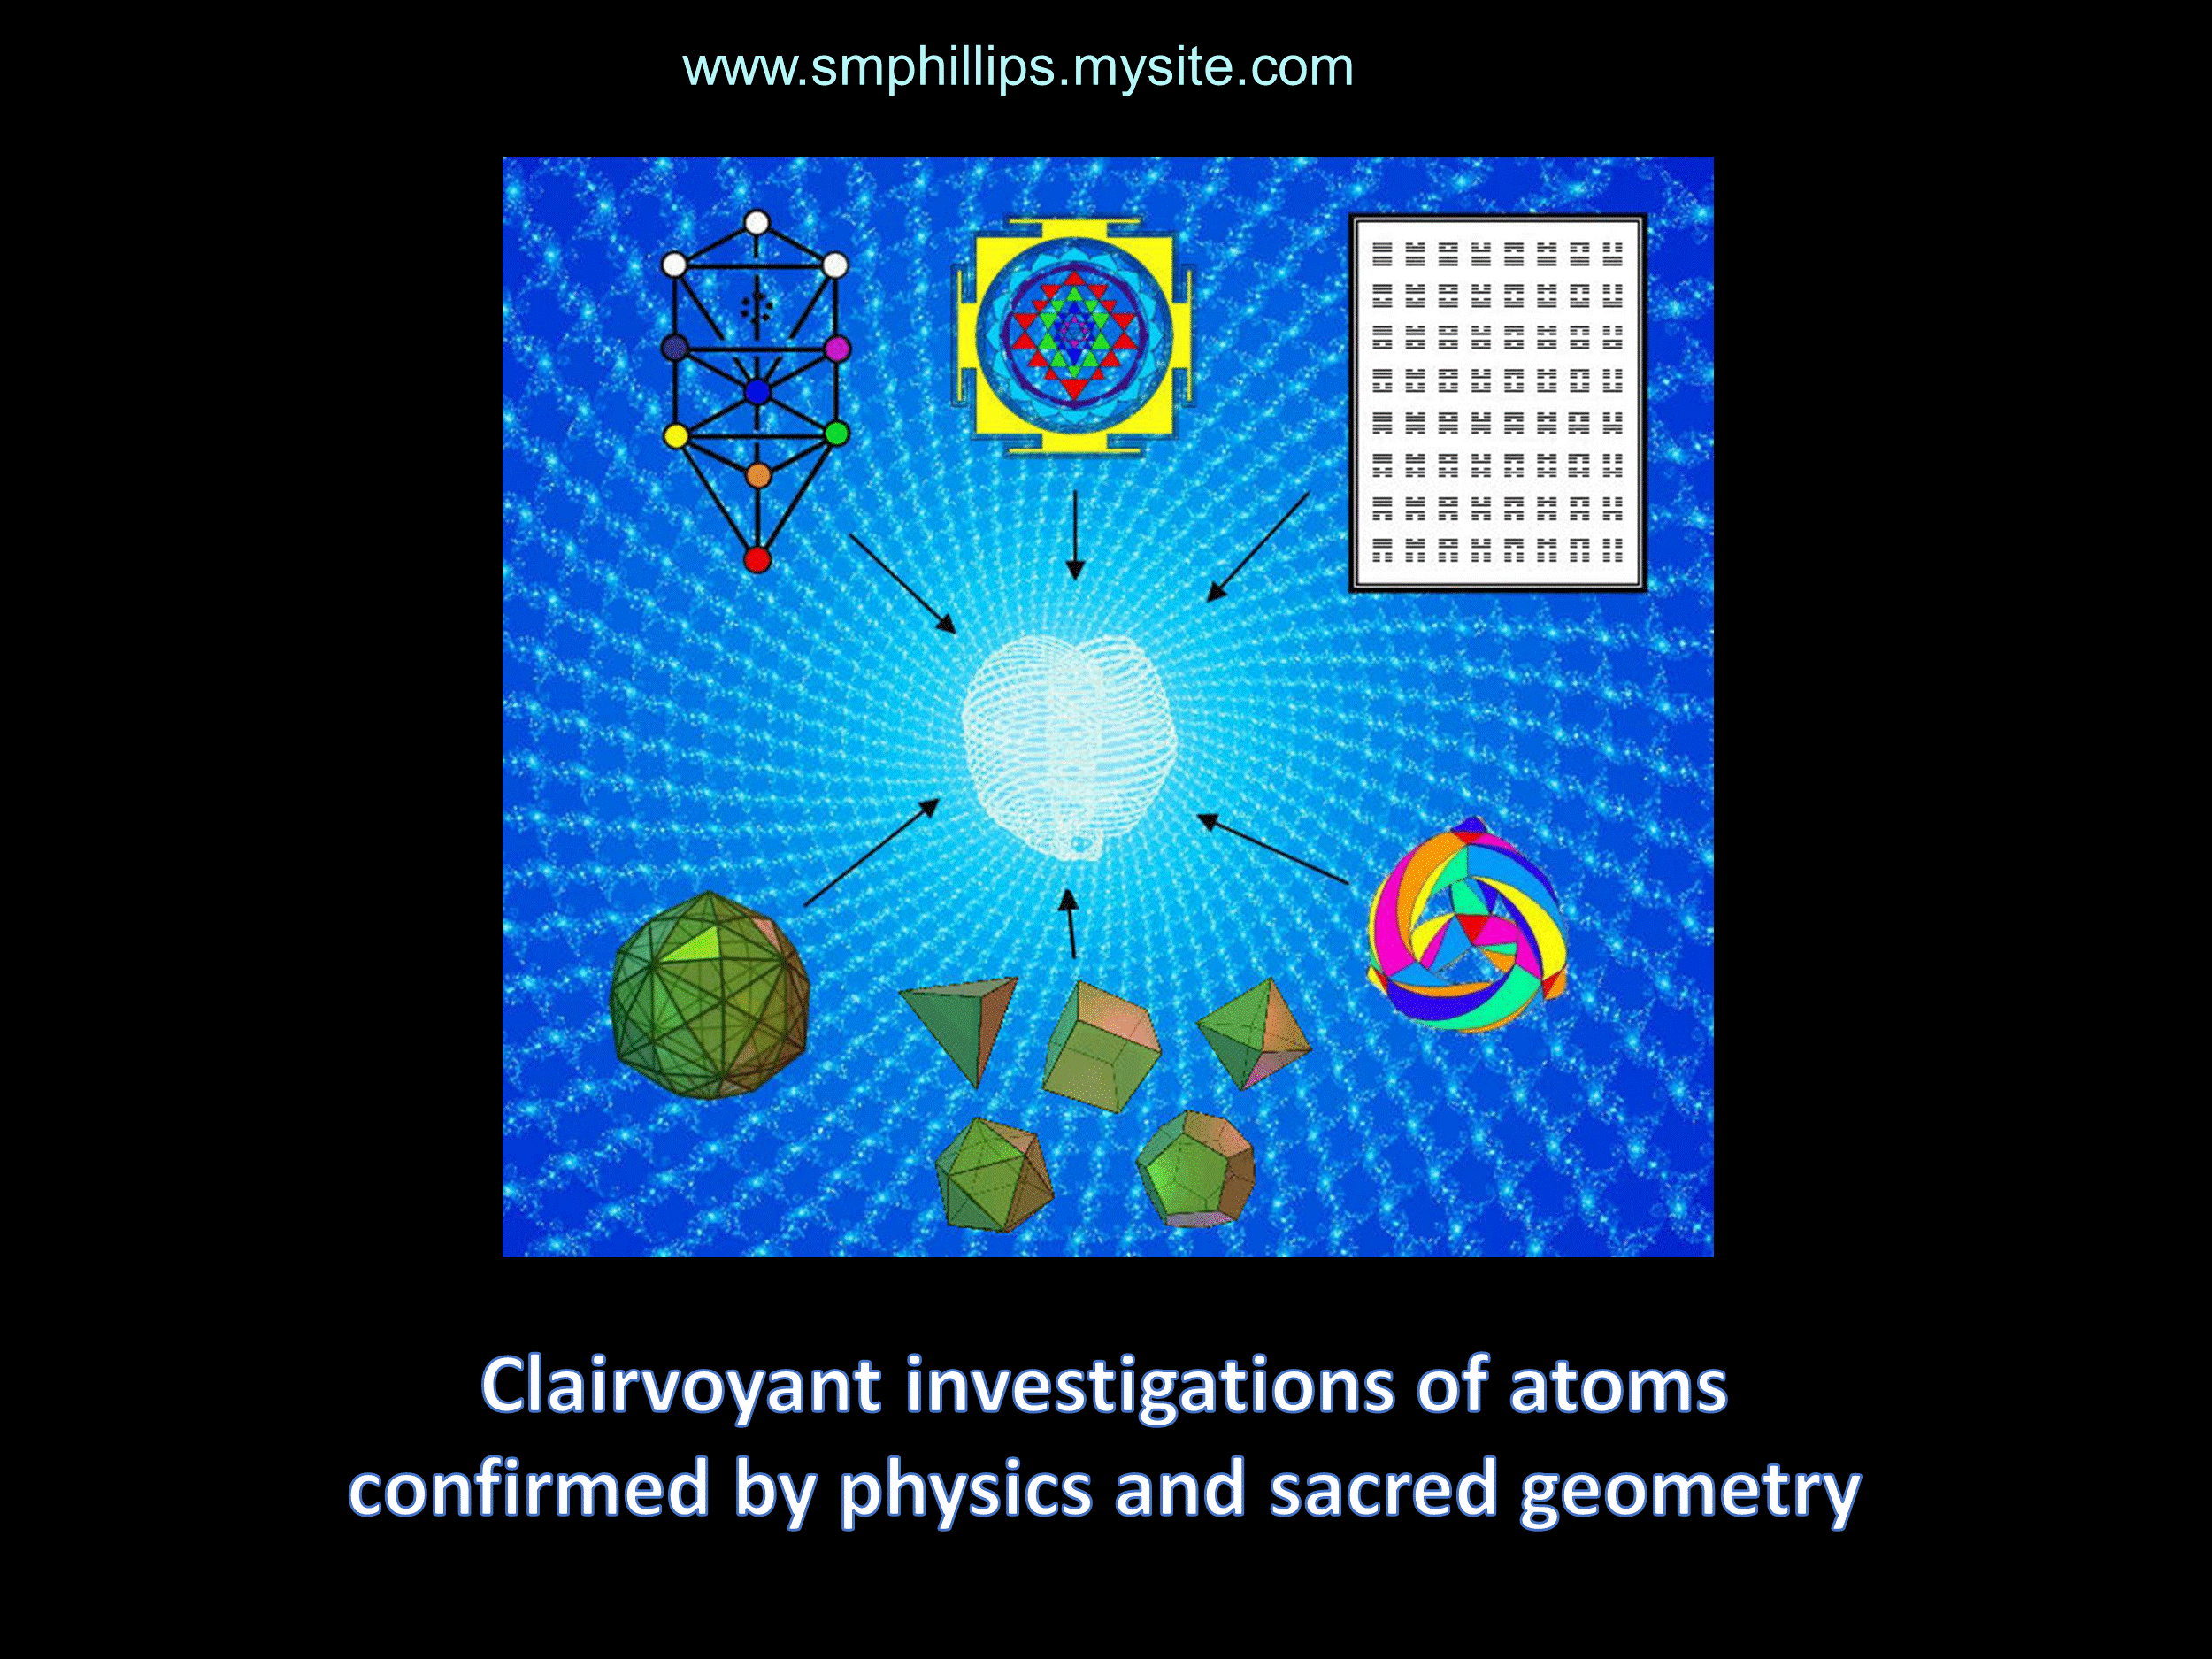 Sacred geometries confirm clairvoyant observations of subatomic particles